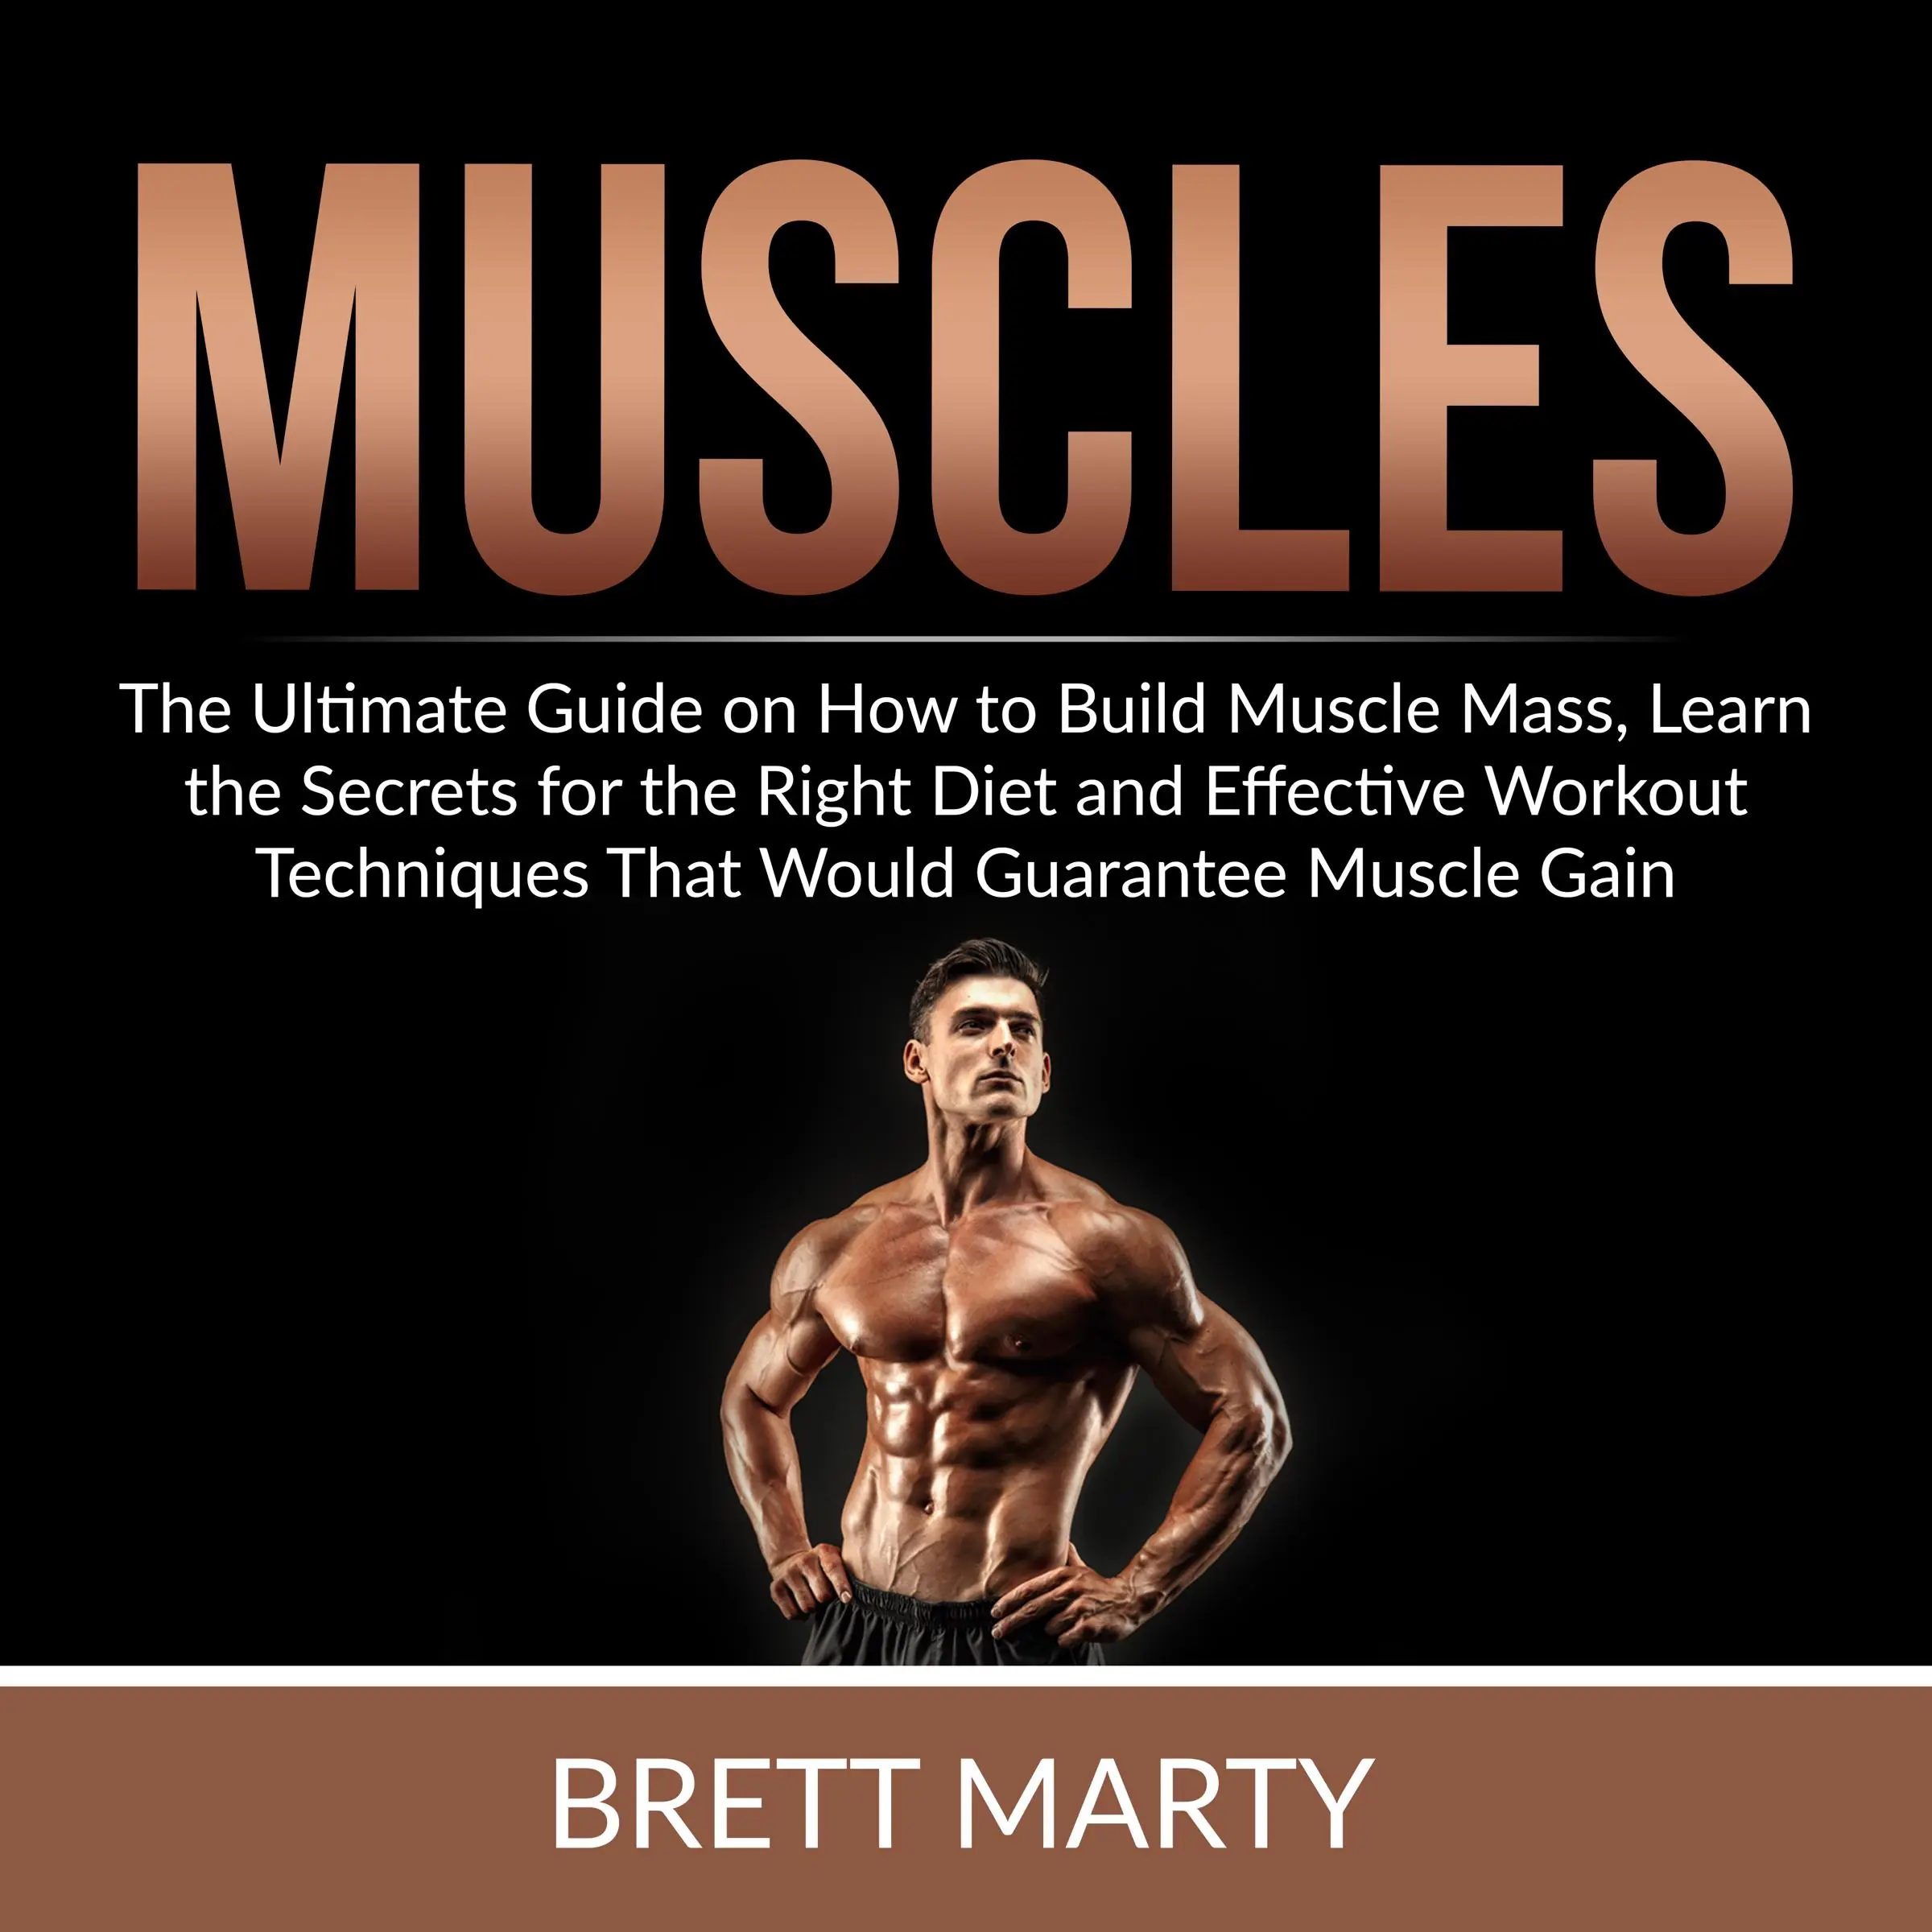 Muscles: The Ultimate Guide on How to Build Muscle Mass, Learn the Secrets for the Right Diet and Effective Workout Techniques That Would Guarantee Muscle Gain by Brett Marty Audiobook